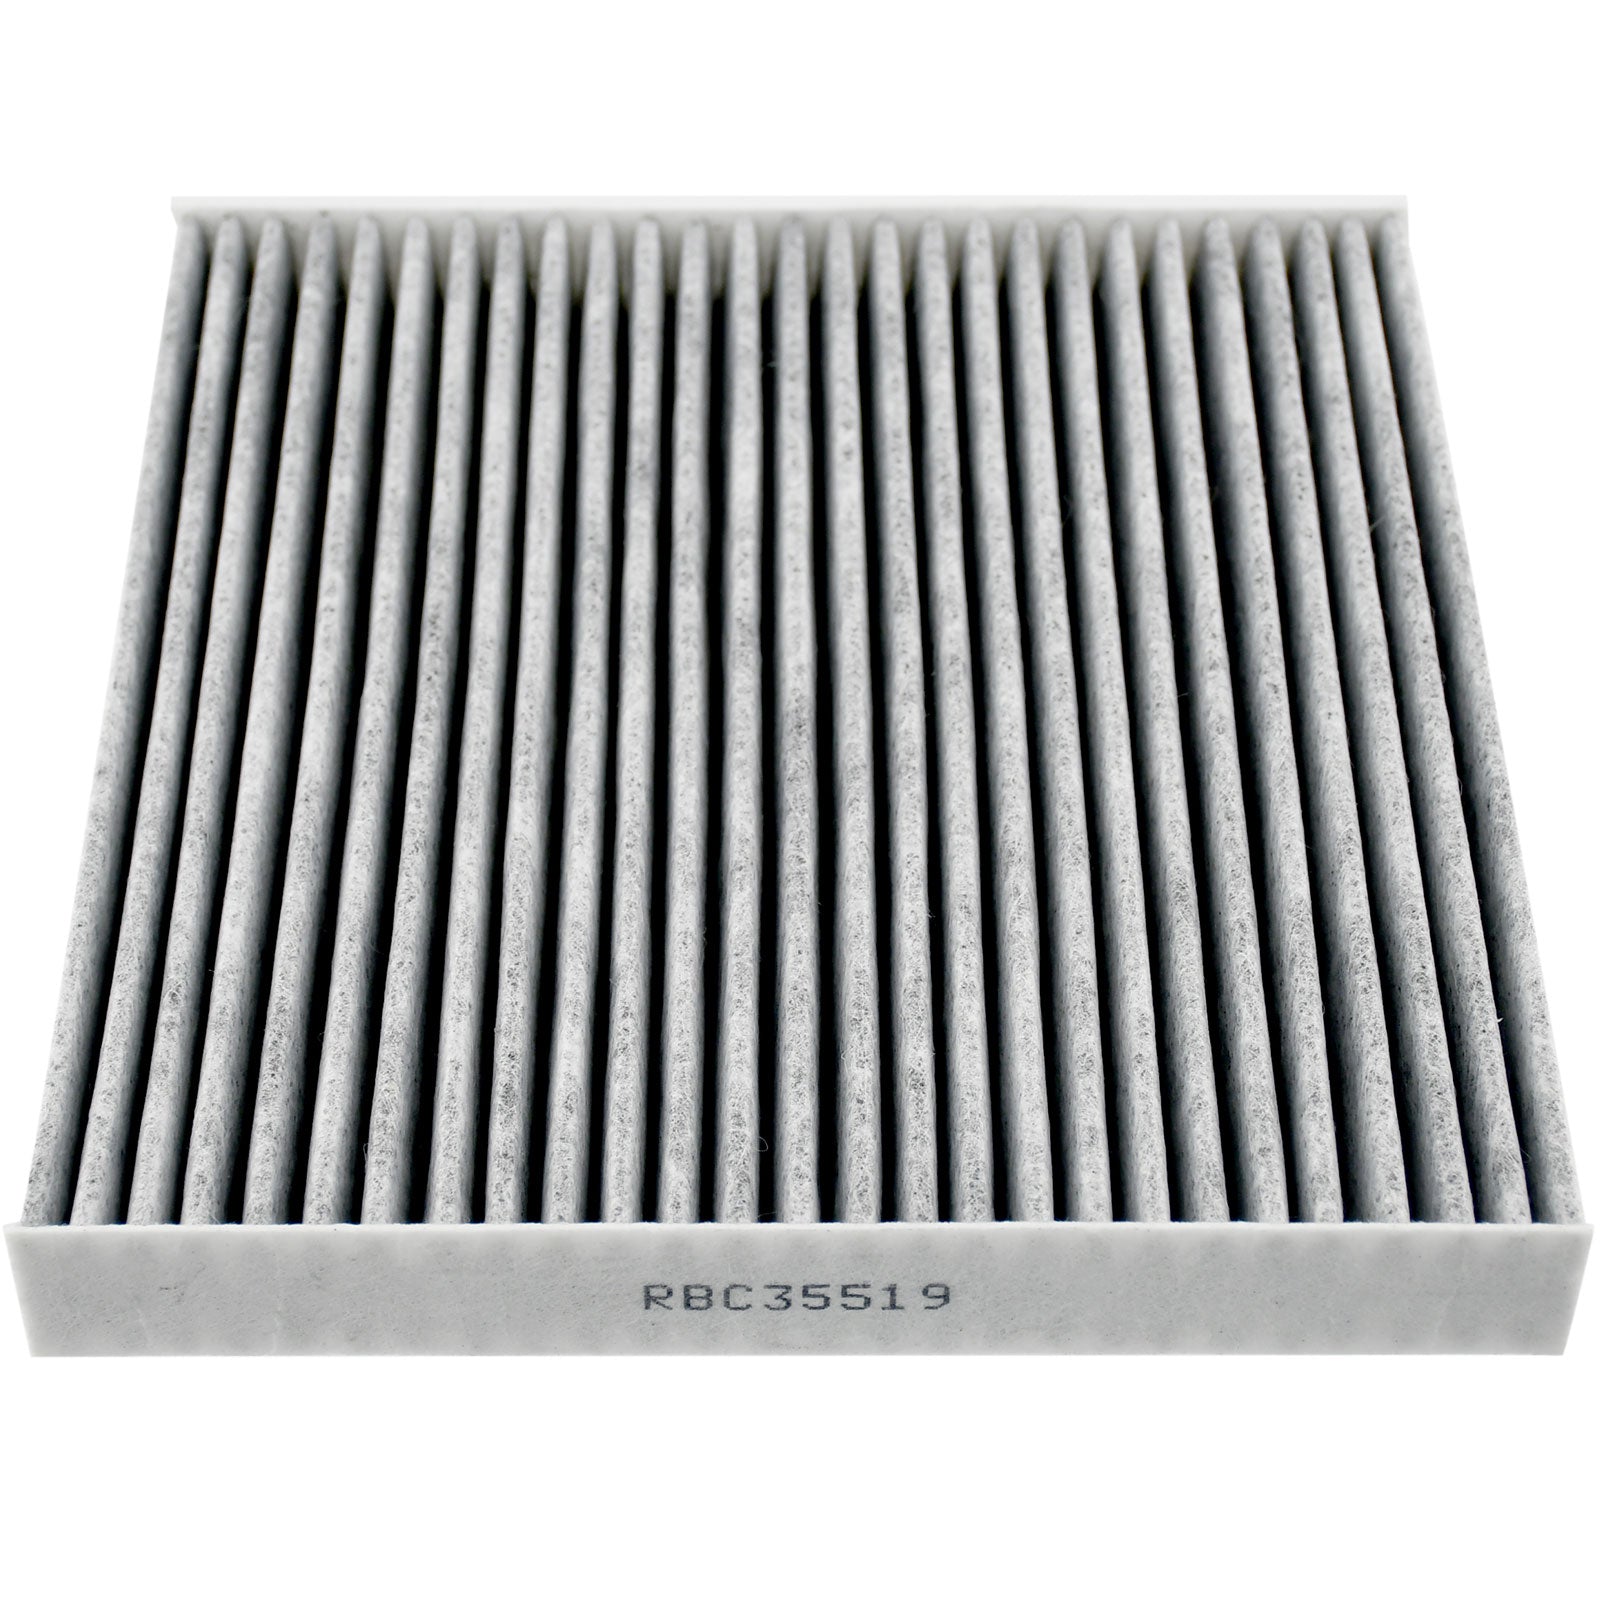 JADODE Cabin Air Filter For Honda Accord CRV Odyssey Civic Acura MDX RDX TLX C35519